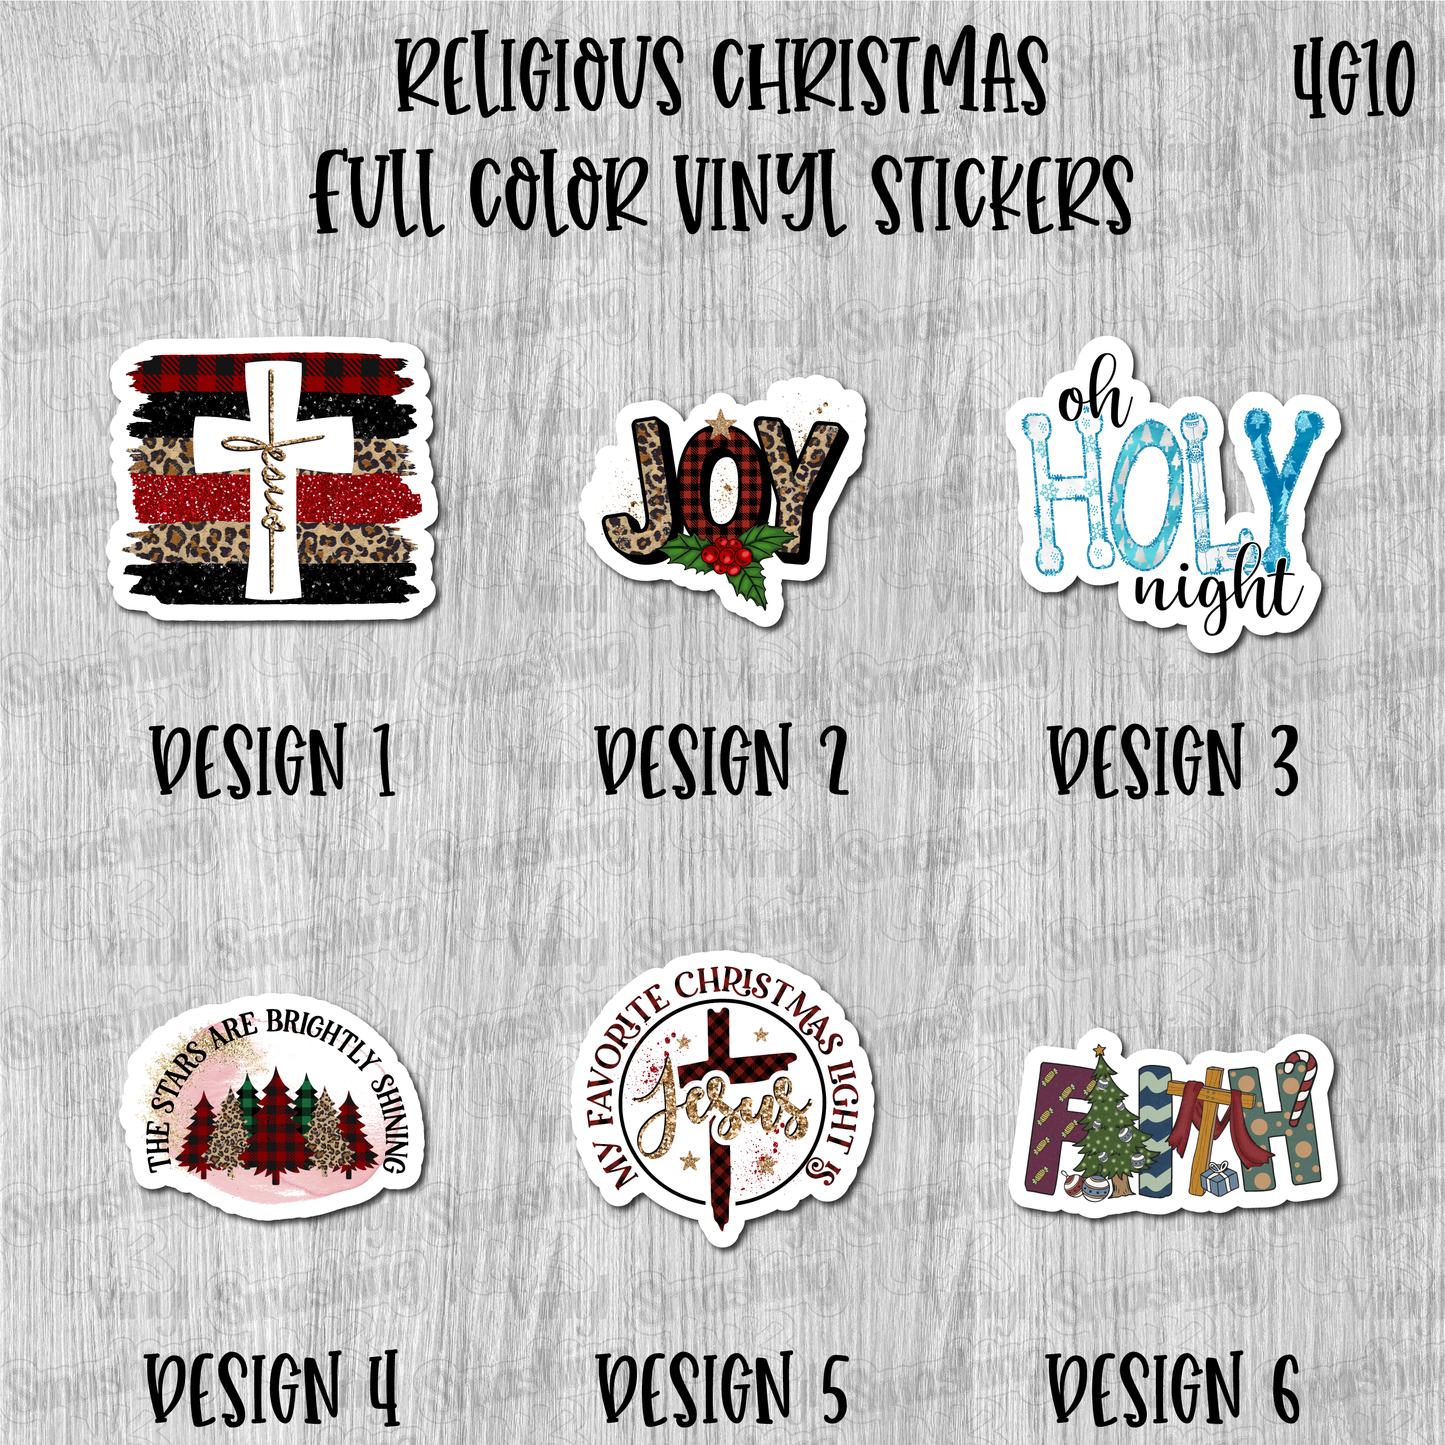 Religious Christmas - Full Color Vinyl Stickers (SHIPS IN 3-7 BUS DAYS)